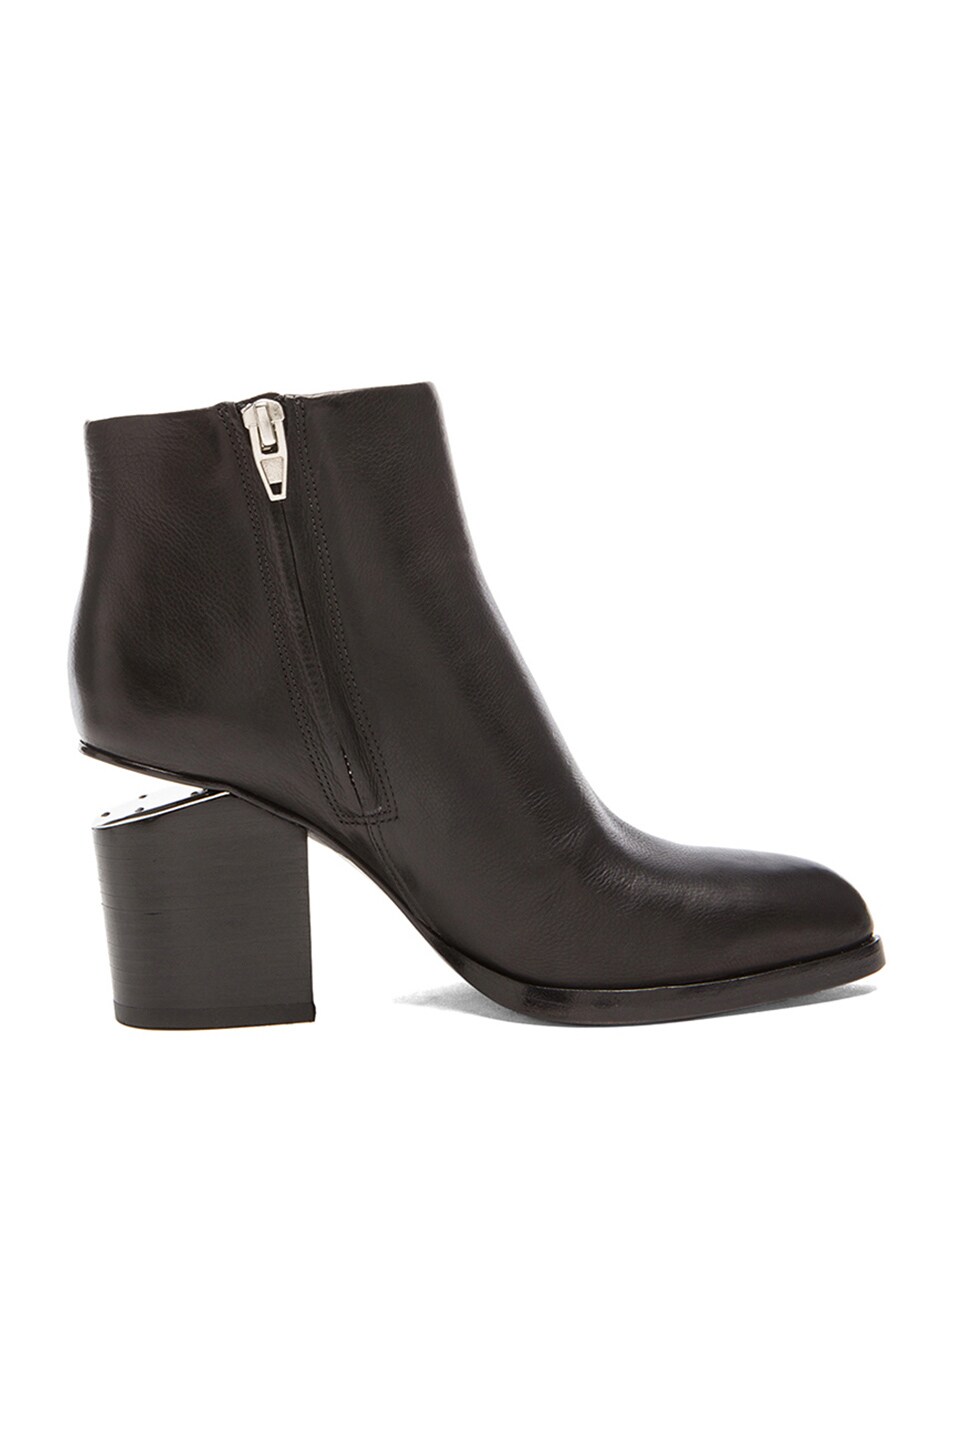 ALEXANDER WANG GABI ANKLE BOOTIES WITH SILVER HARDWARE